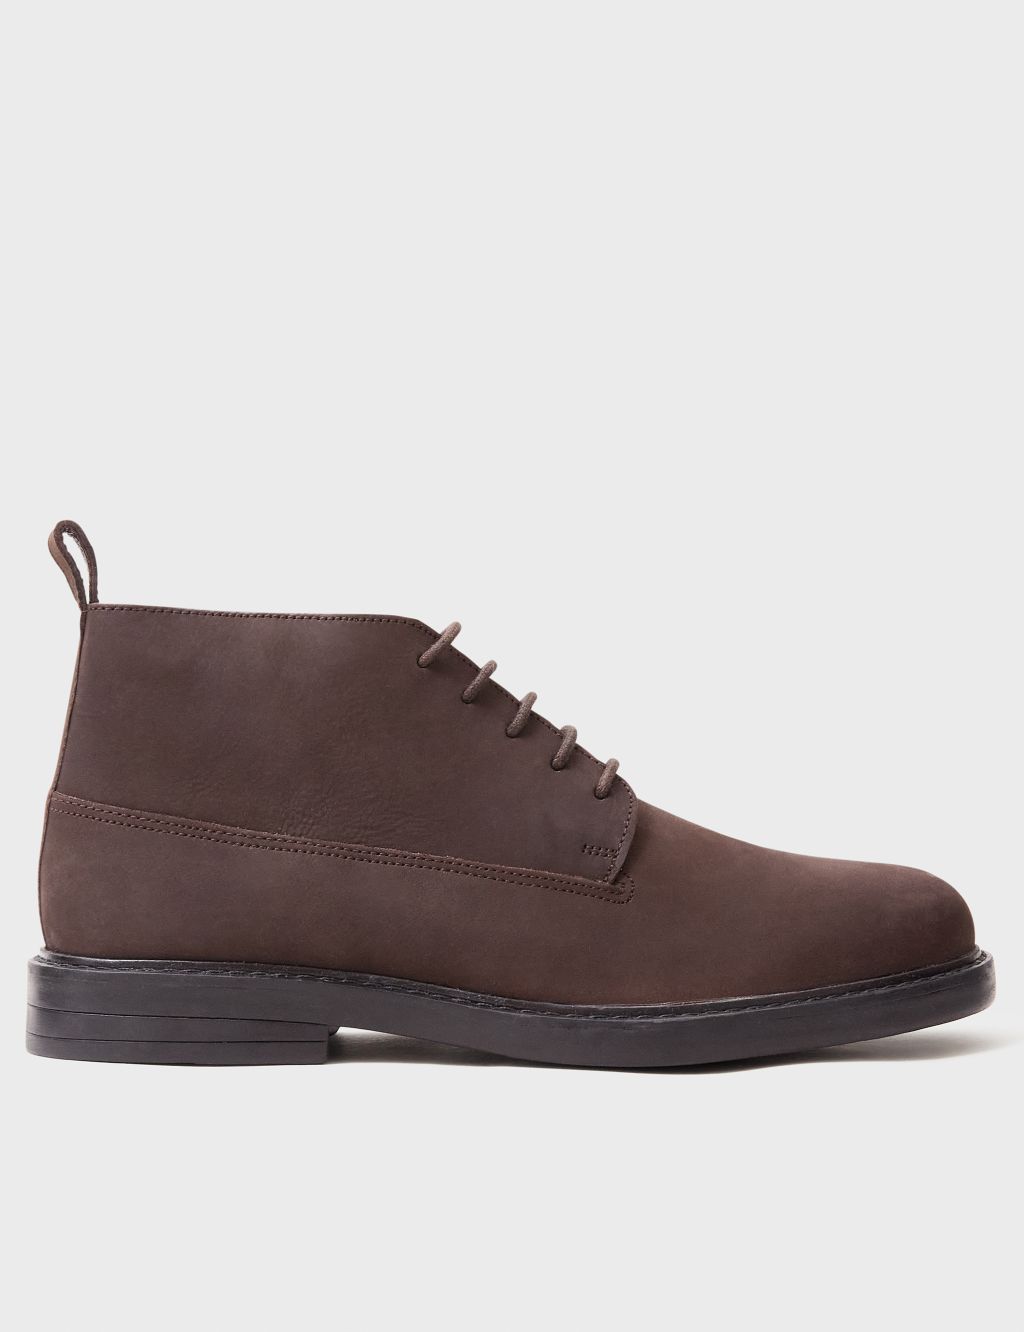 Leather Desert Boots image 2